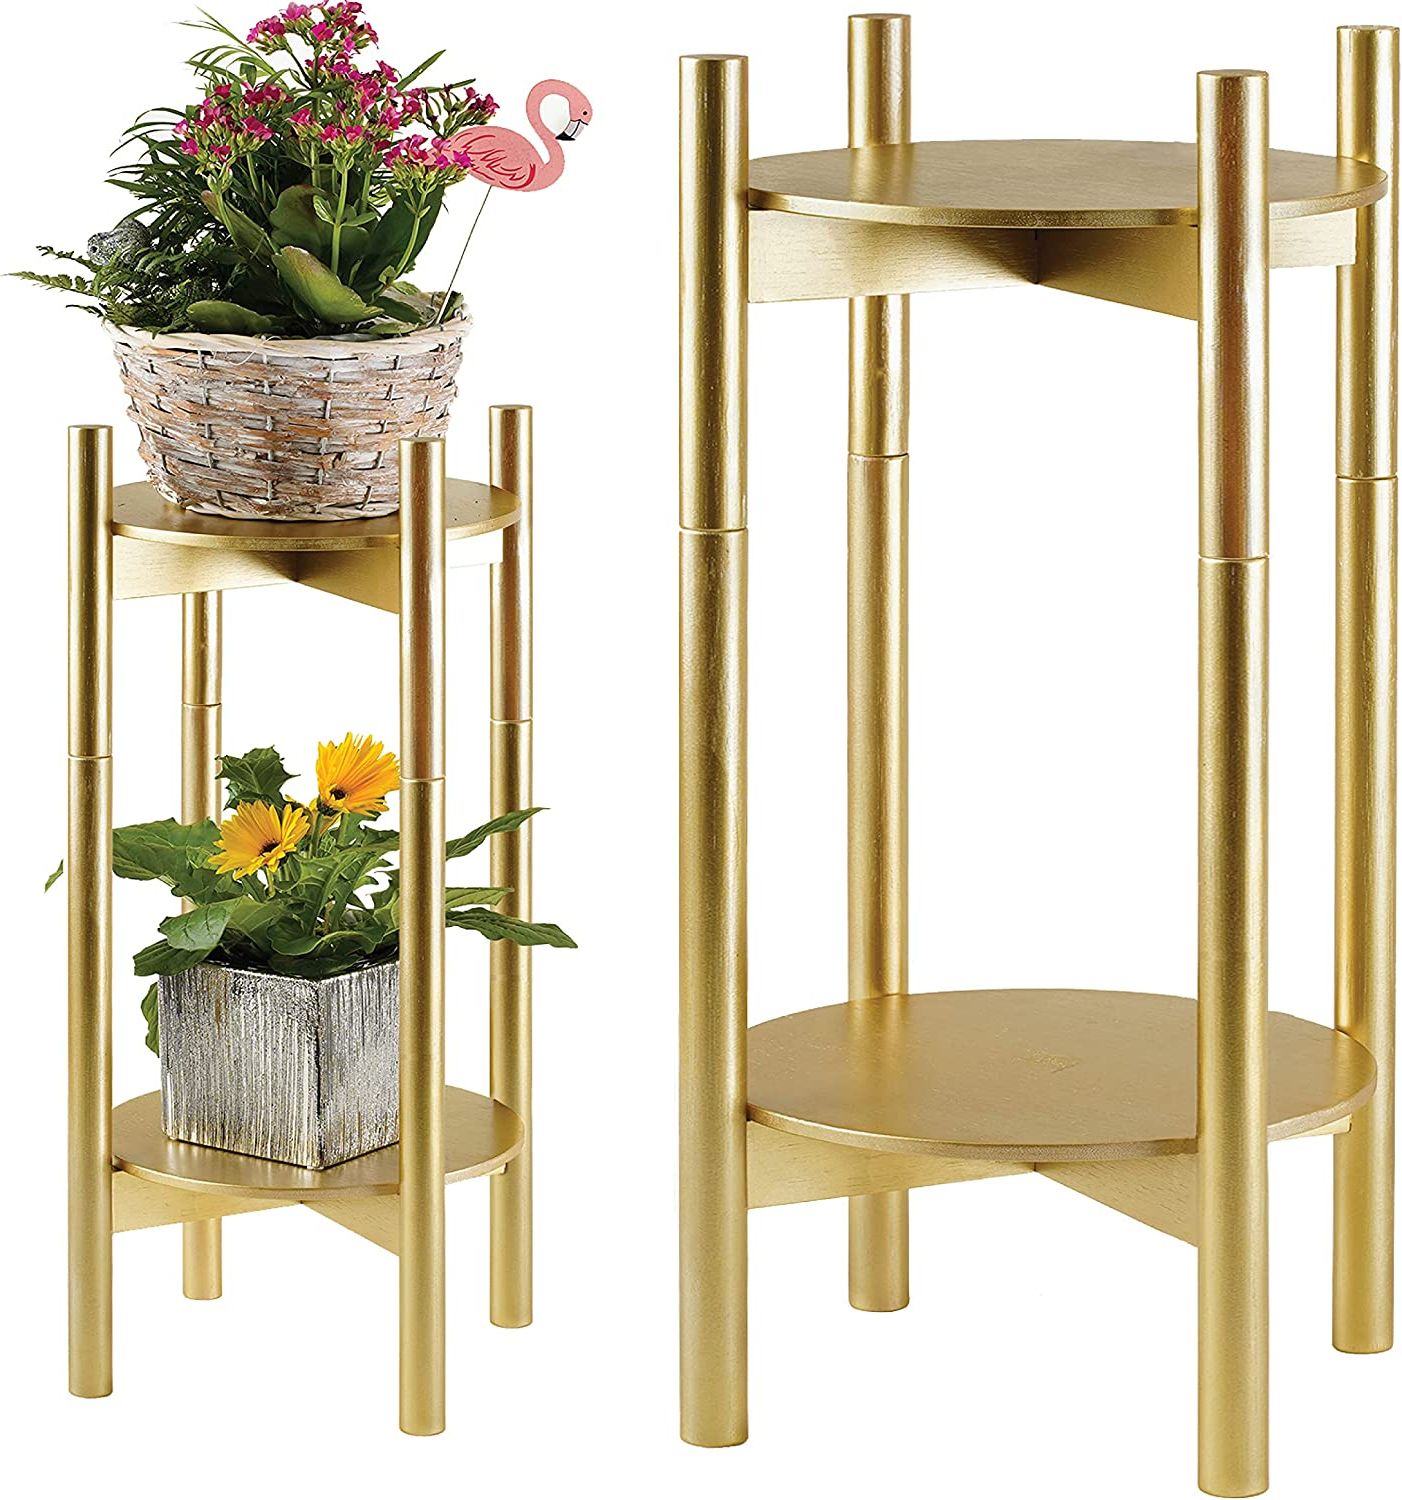 24 Inch Plant Stands Regarding Well Known Tall Plant Stand, Gold,10 X 24 Inch (wxh), Set Of 2, Stackable,  Convertible, Planter Holder For Plant Pots And Flower Vases – Bamboo Wood :  Amazon (View 9 of 10)